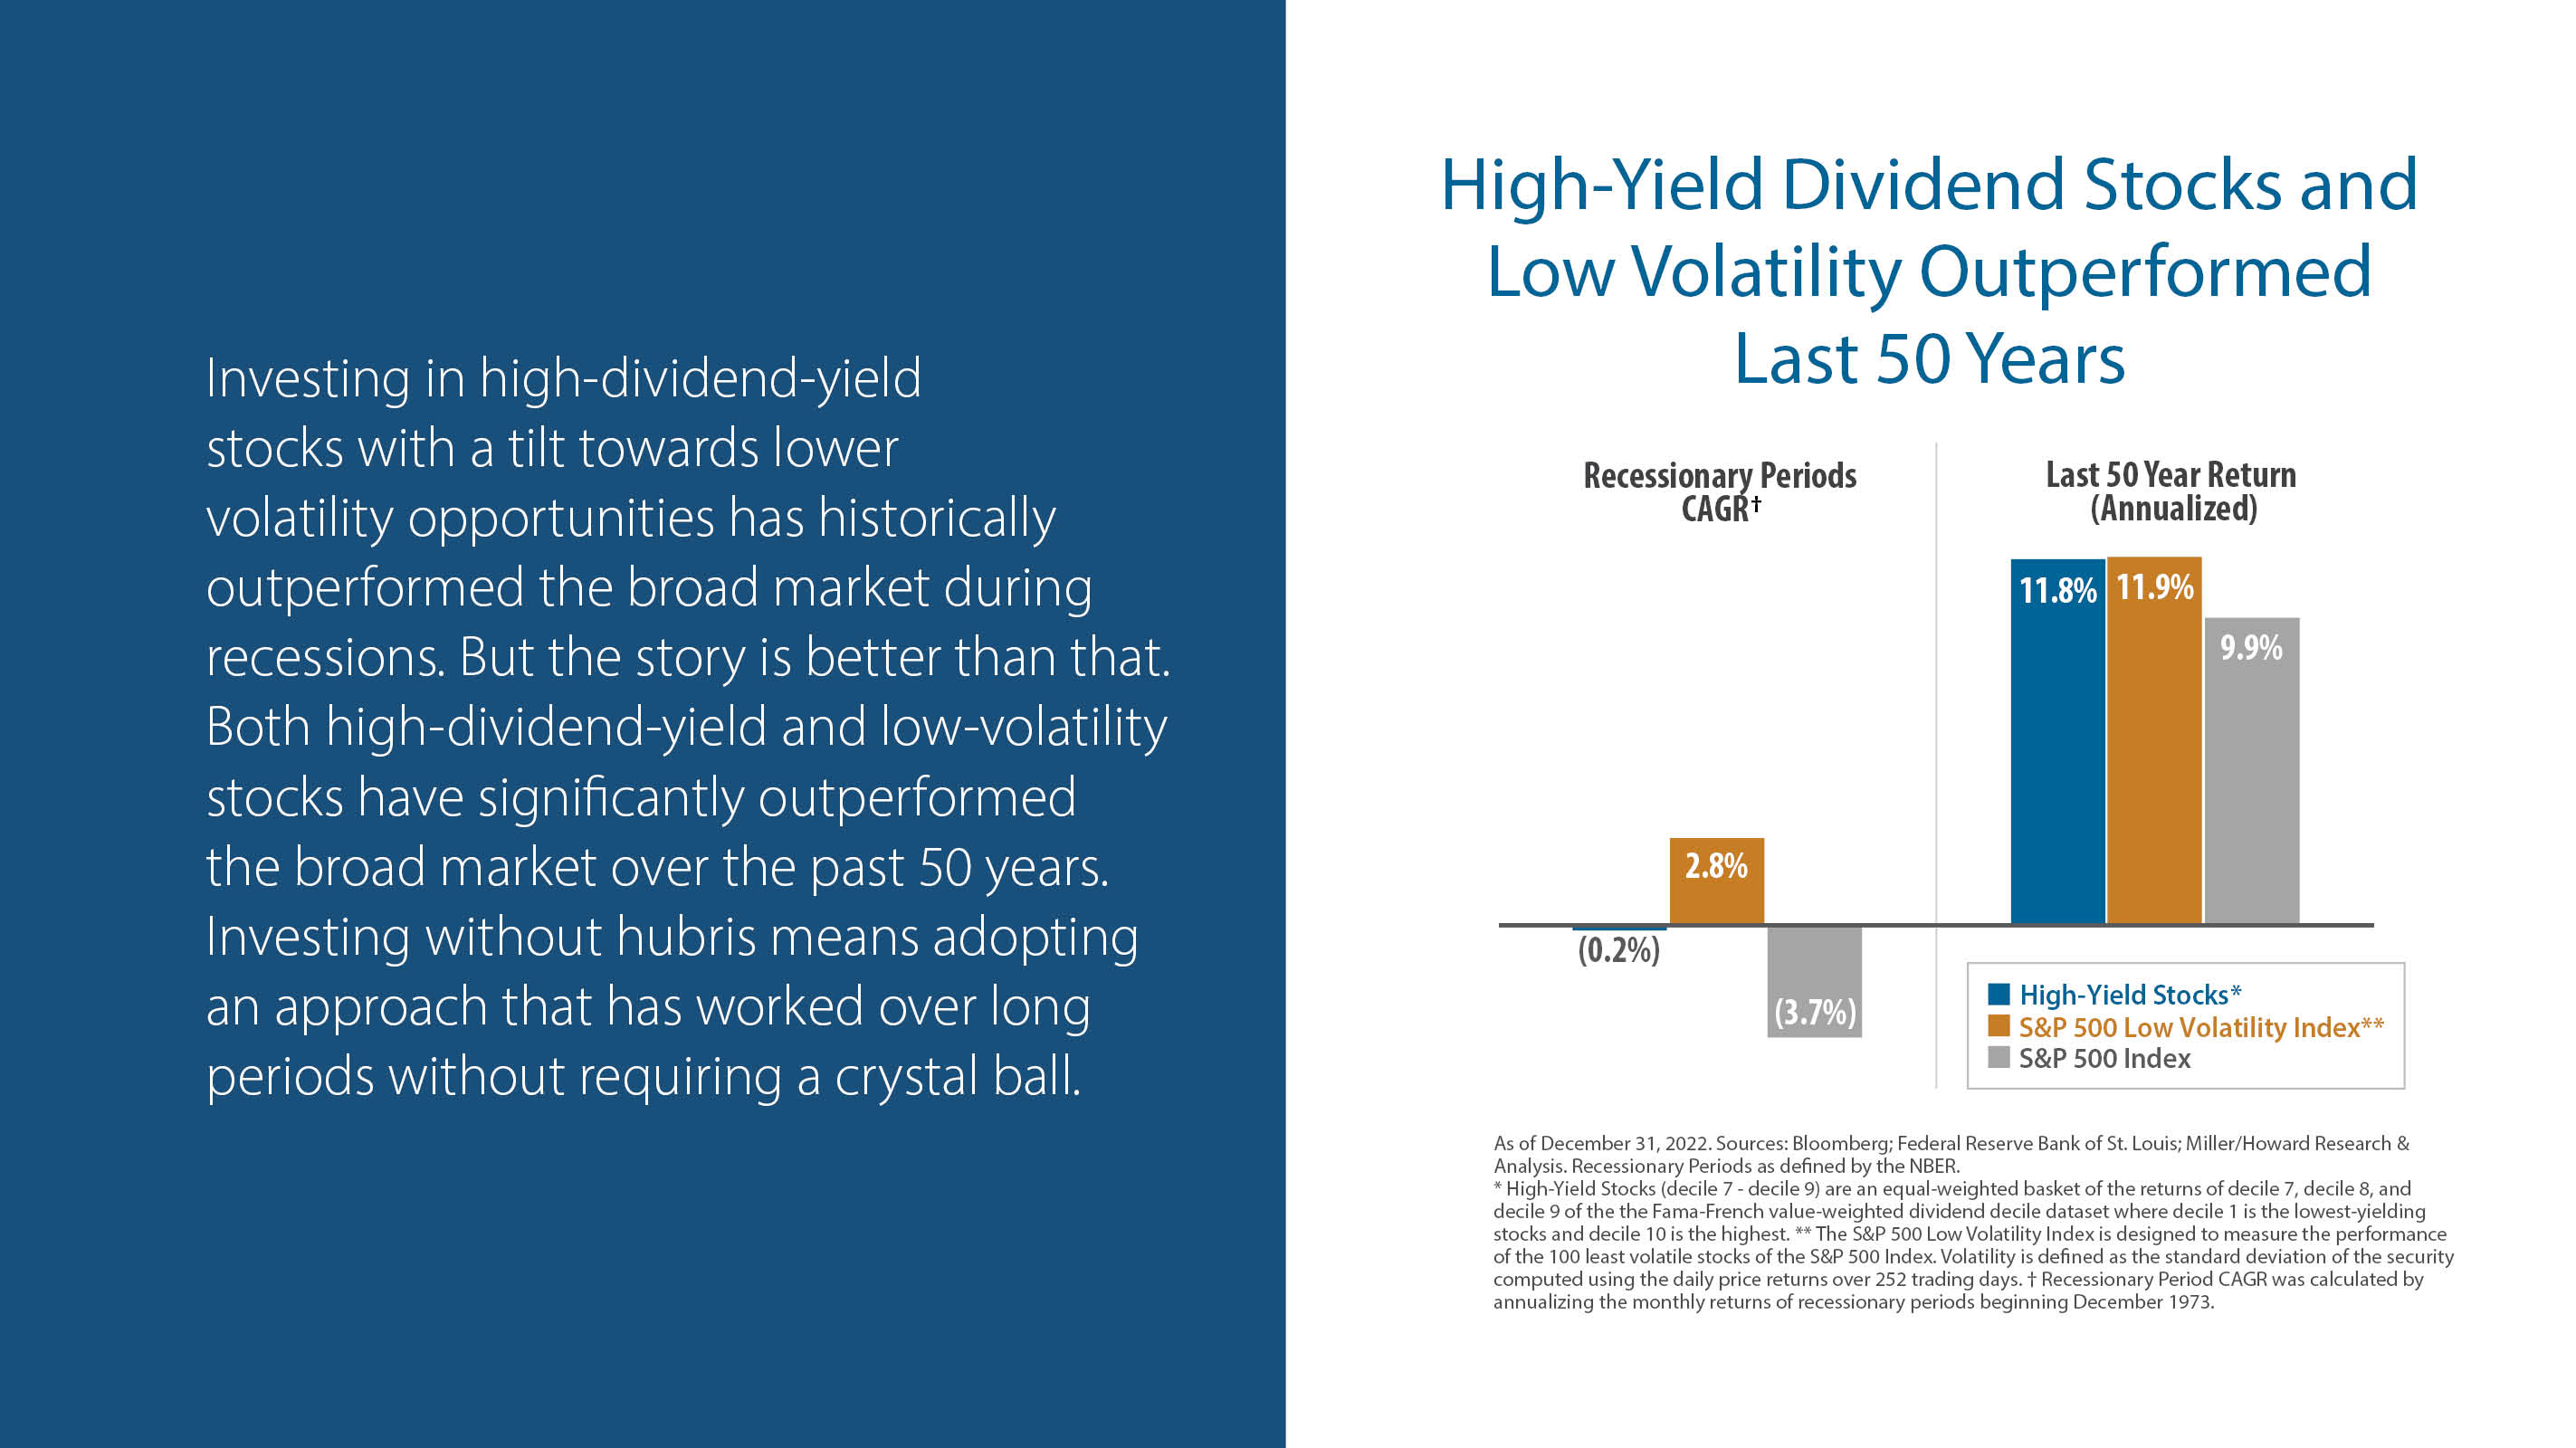 Investing in high-dividend-yield stocks